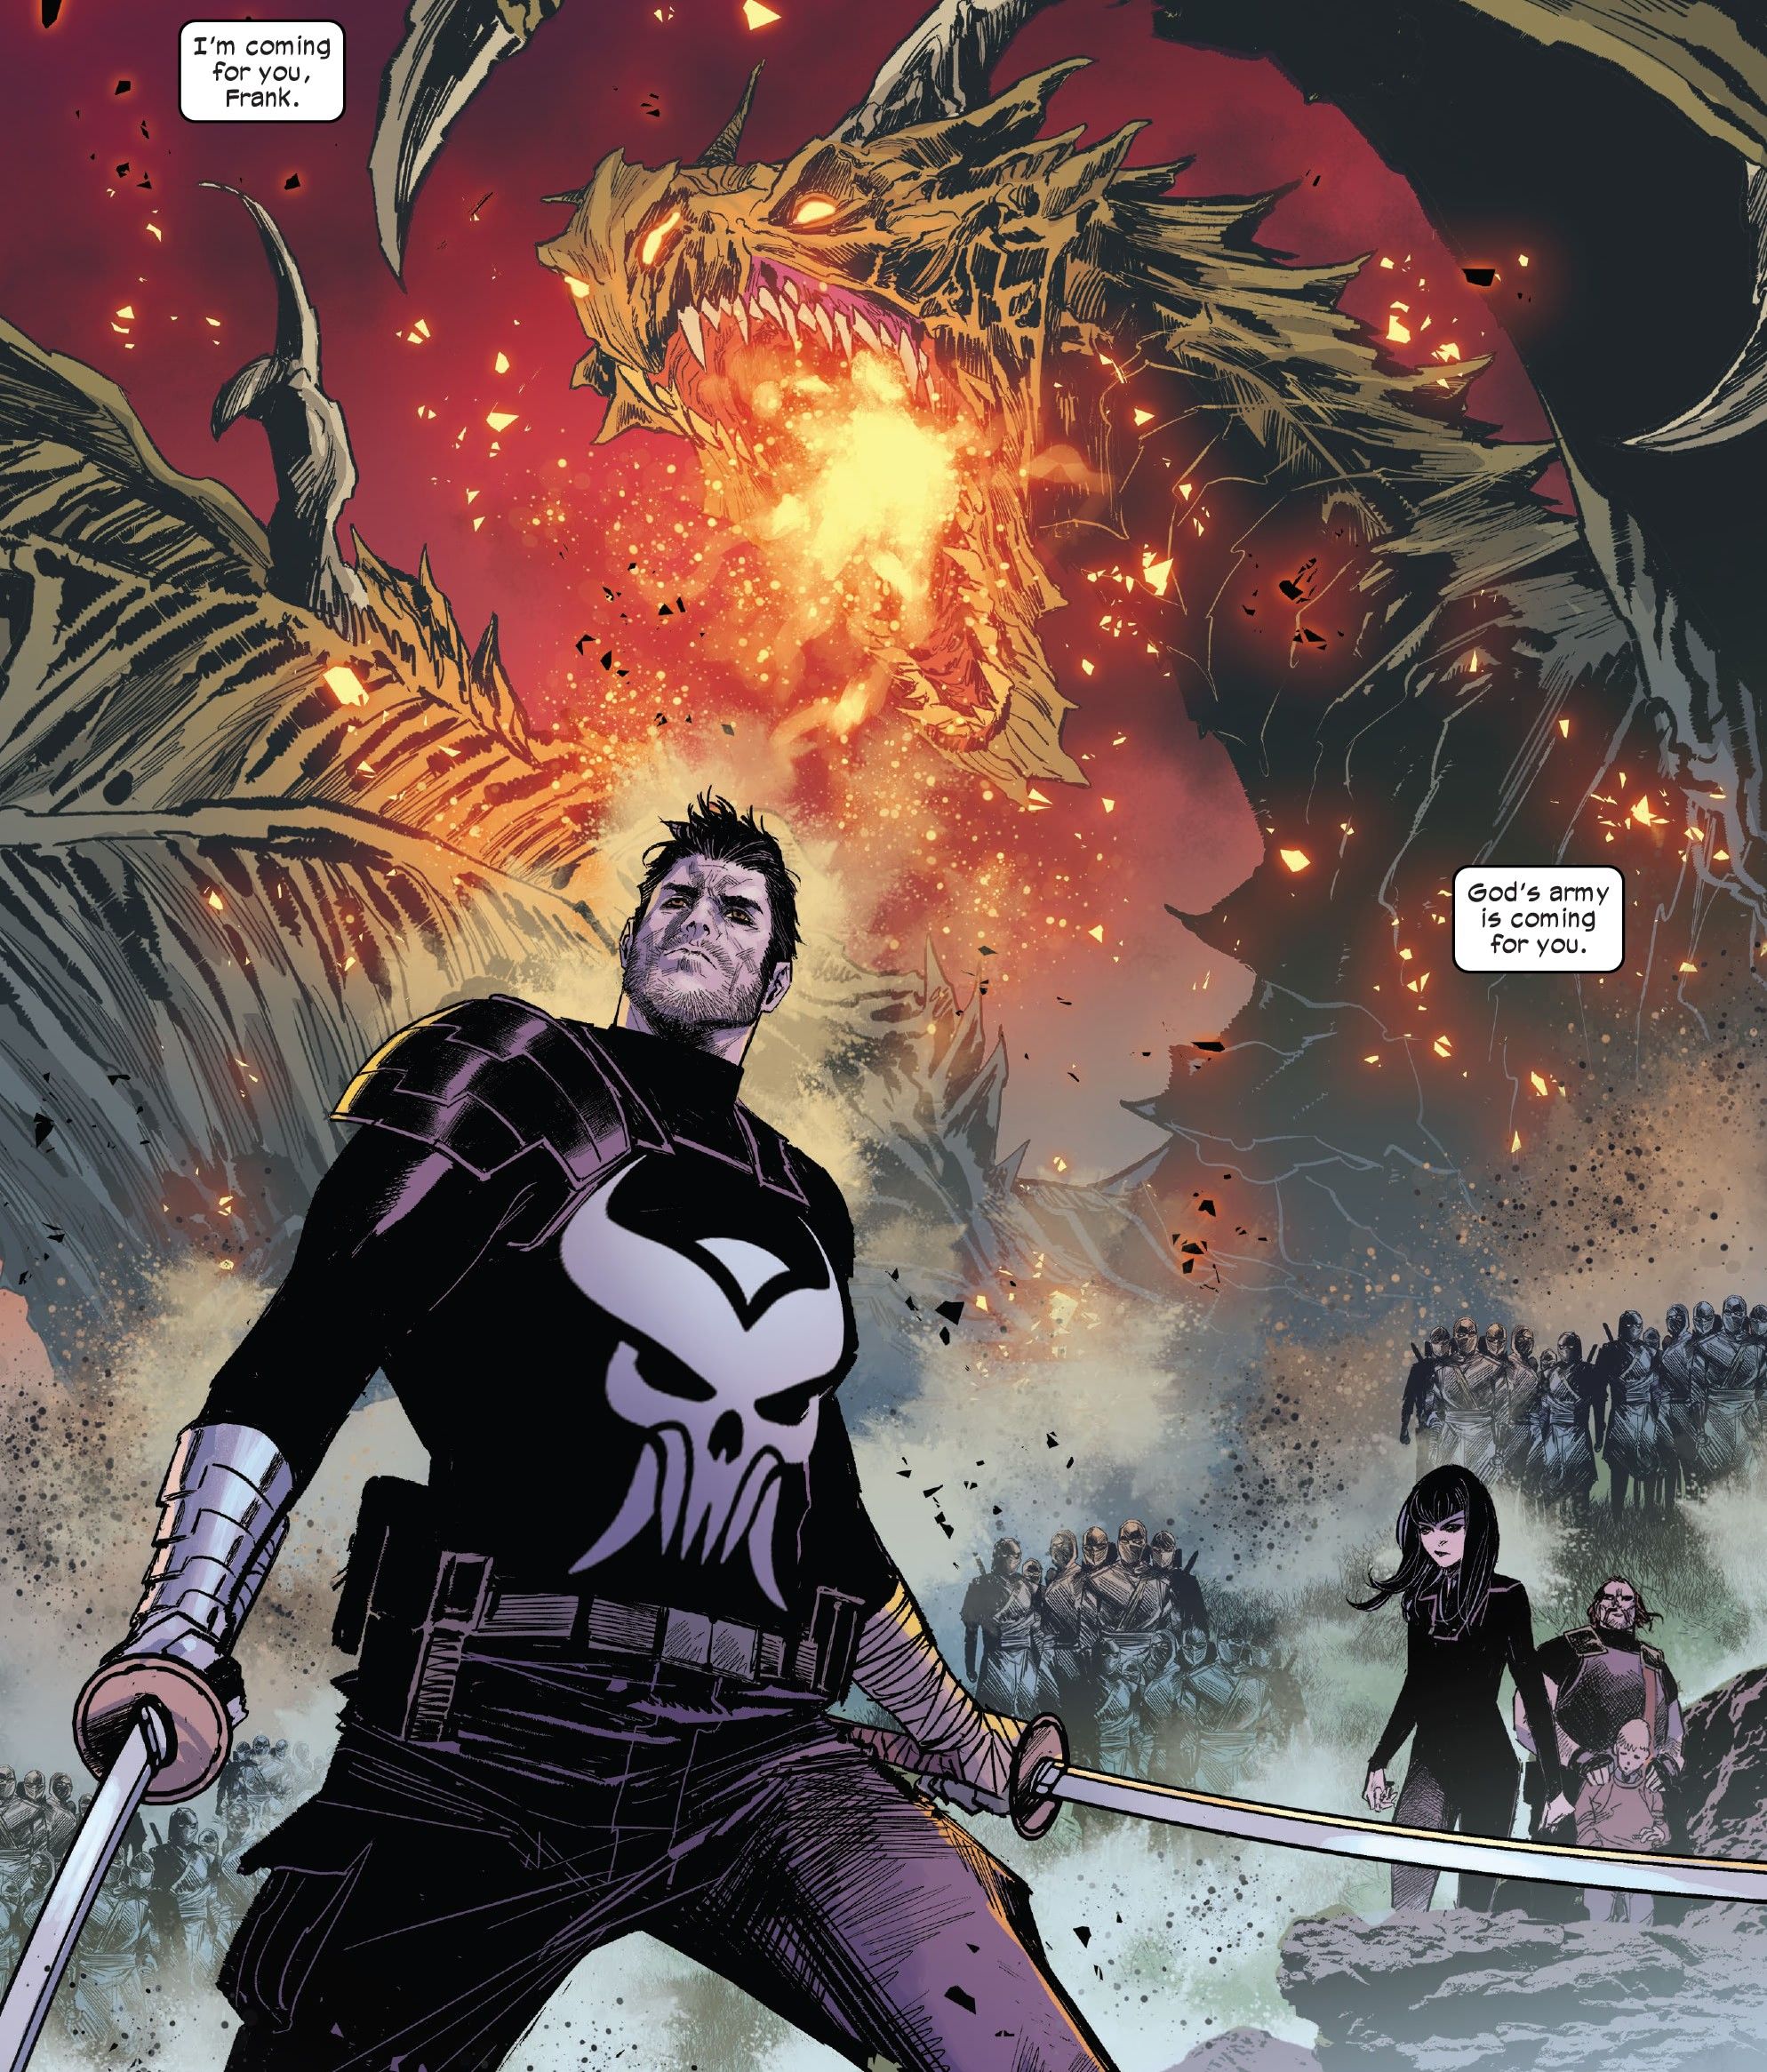 The Punisher Just Got His Best Weapon Ever: A Dragon